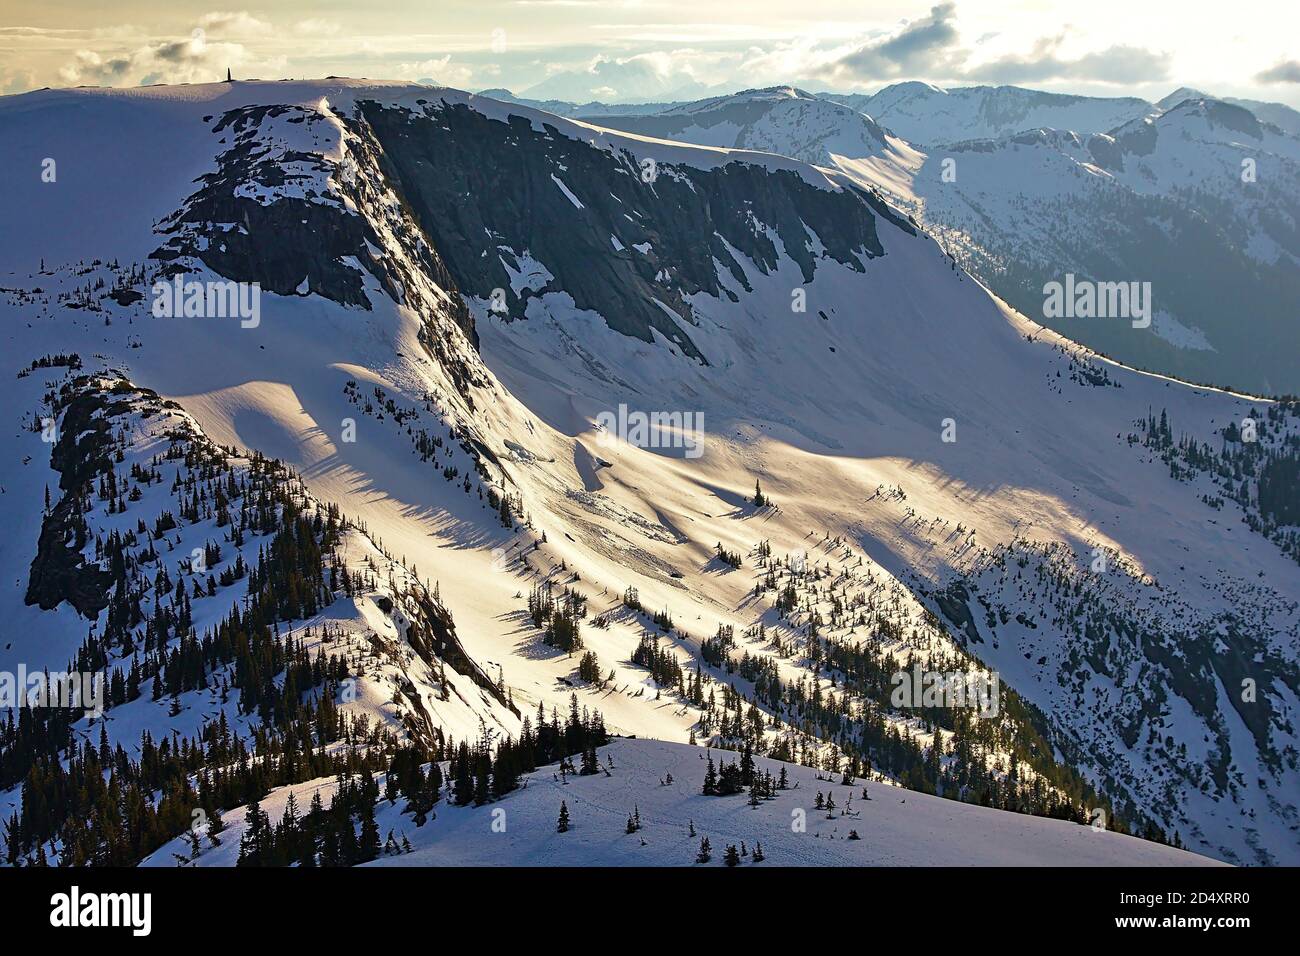 Mountain landscape panorama with snow slope and spruce trees during sunset, Needle Peak, Coquihalla, British Columbia, Canada Stock Photo